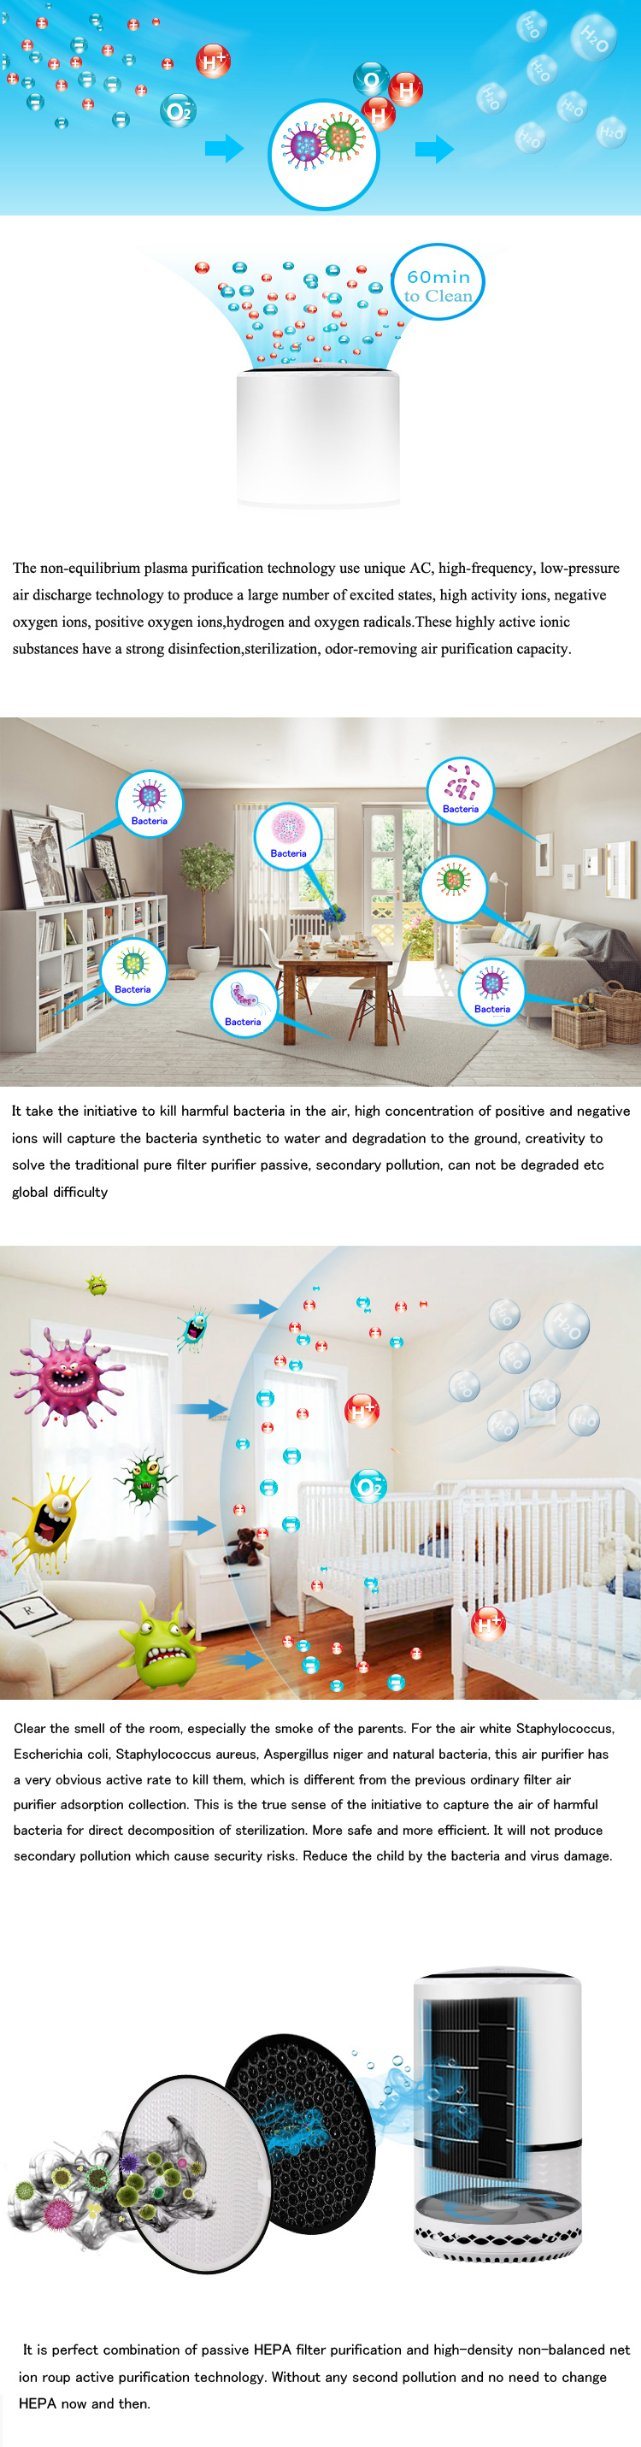 Non-Equilibrium Ion Group Negative Home Air Purifier with HEPA